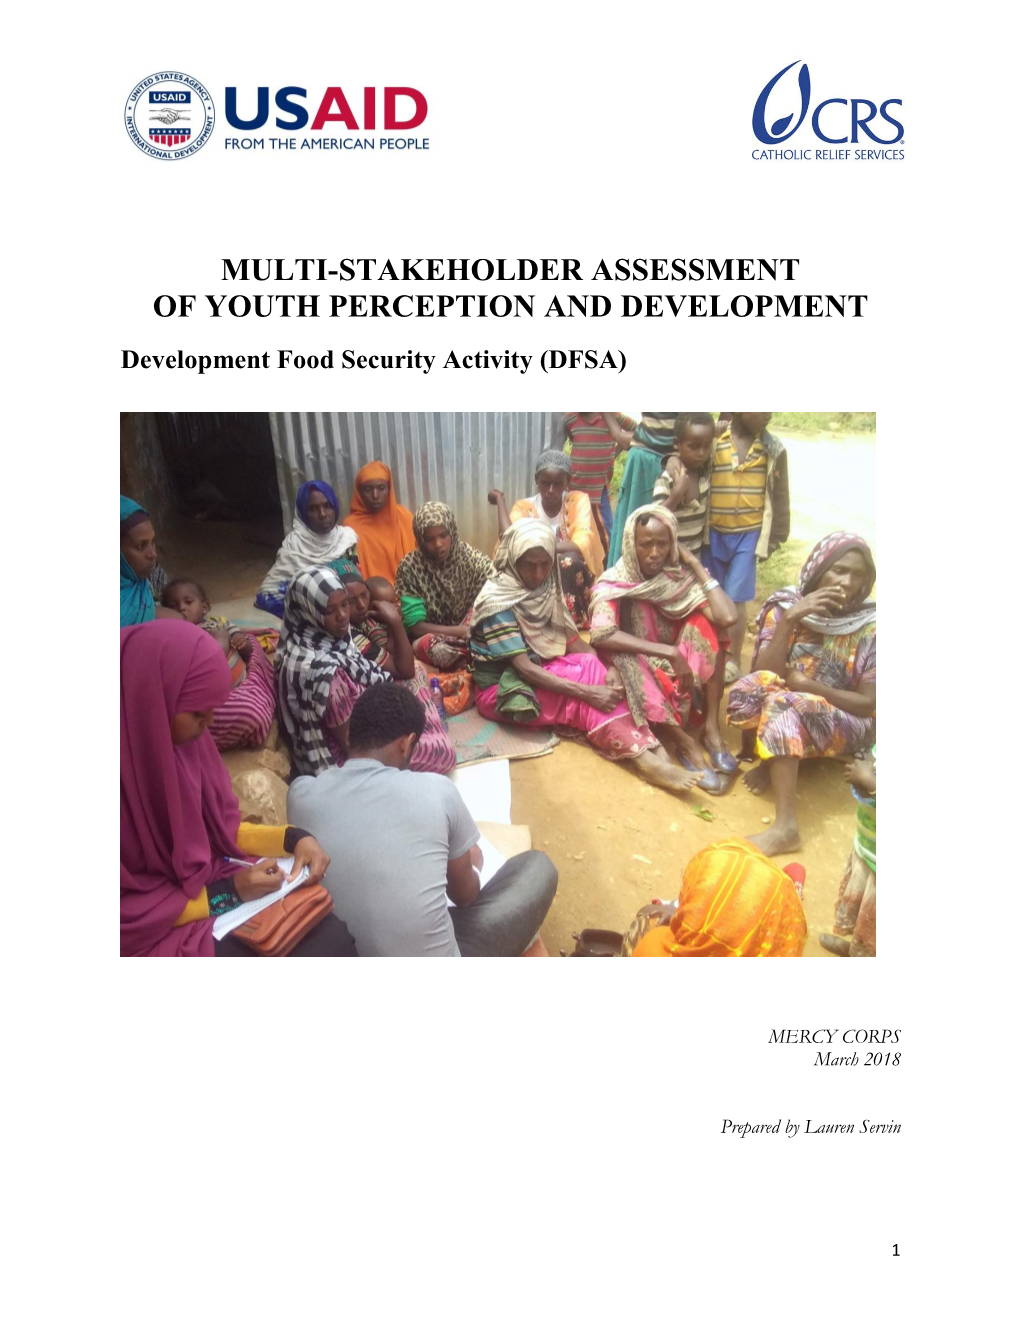 MULTI-STAKEHOLDER ASSESSMENT of YOUTH PERCEPTION and DEVELOPMENT Development Food Security Activity (DFSA)